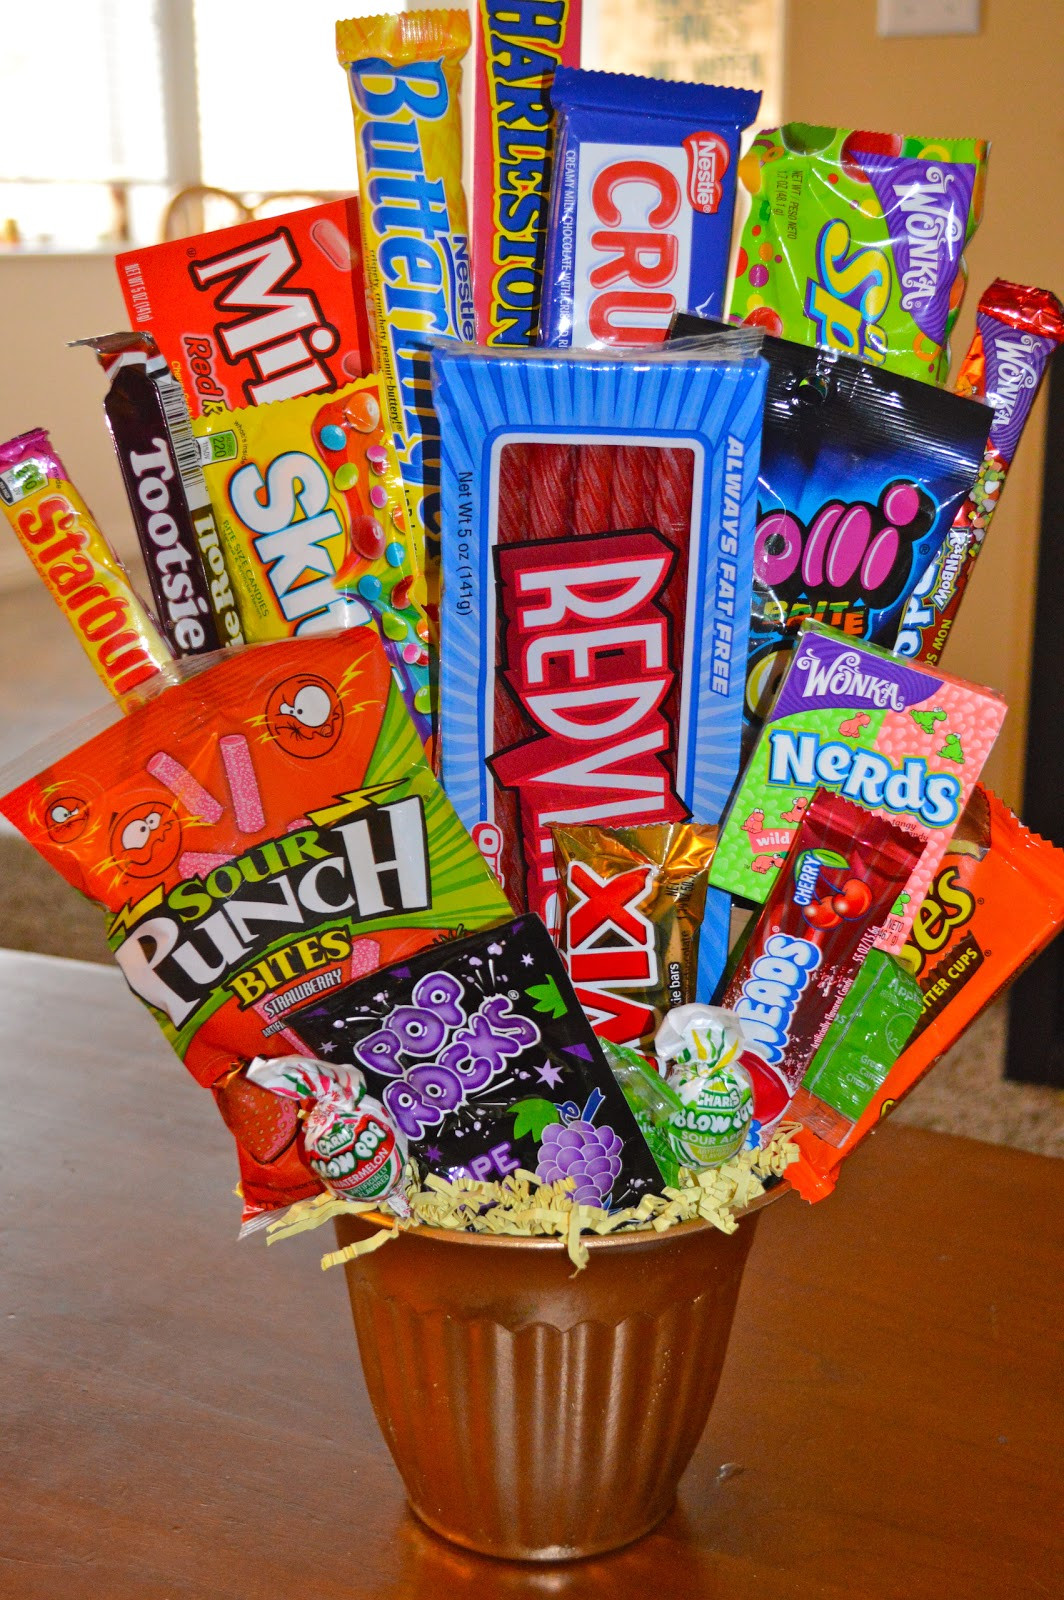 Candy Gift Basket Ideas
 A Dose of Serendipity CANDY GIFT BUCKET